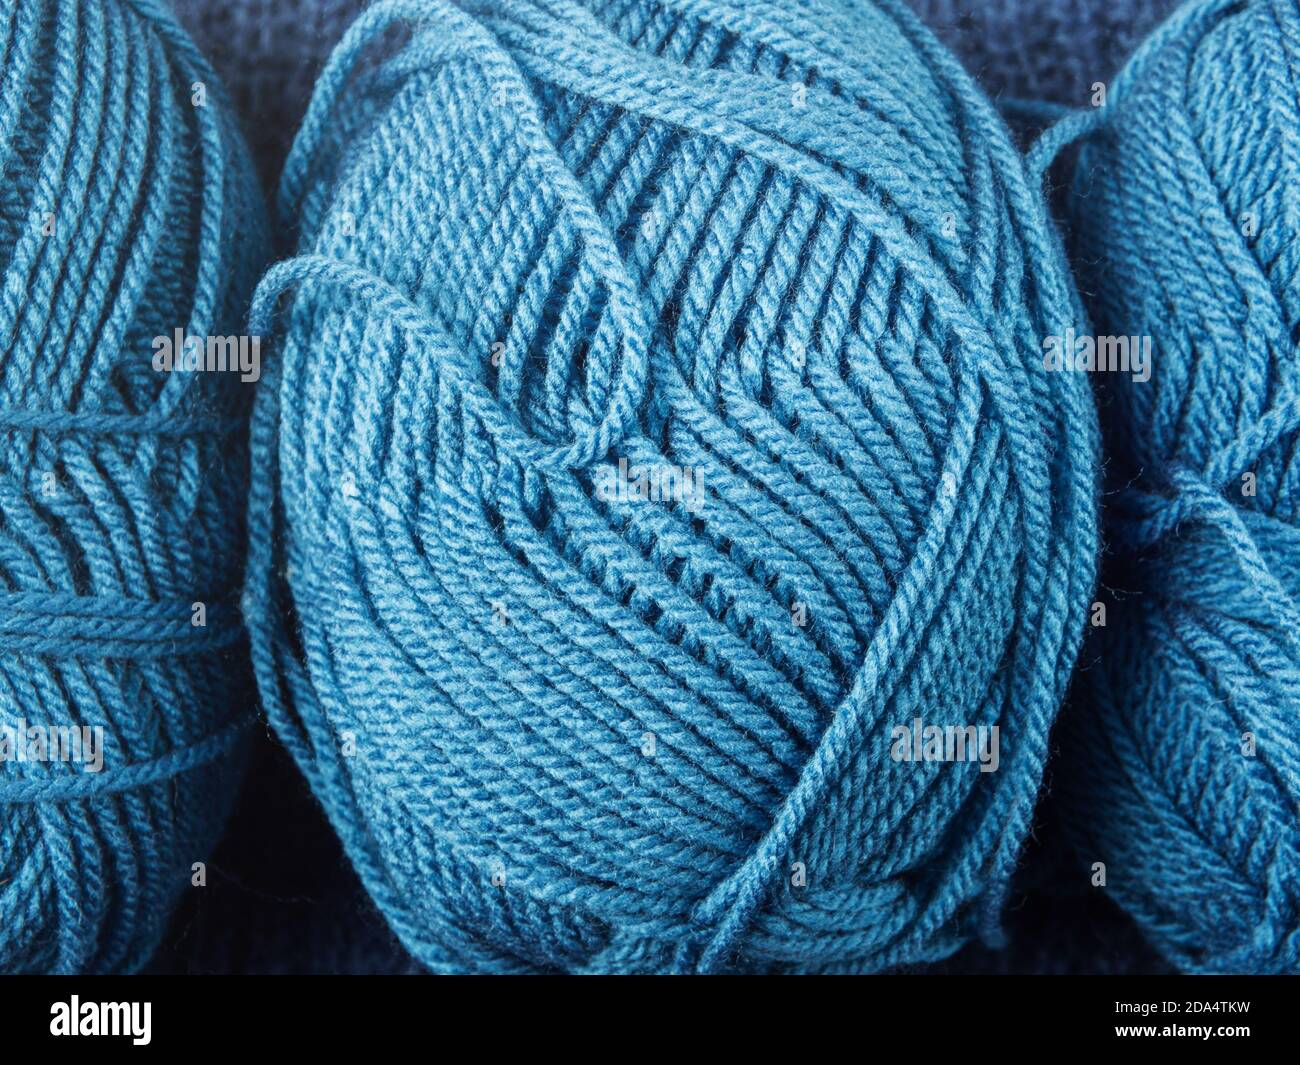 Soft Blue Woolen Yarn Isolated On White Top View Stock Photo